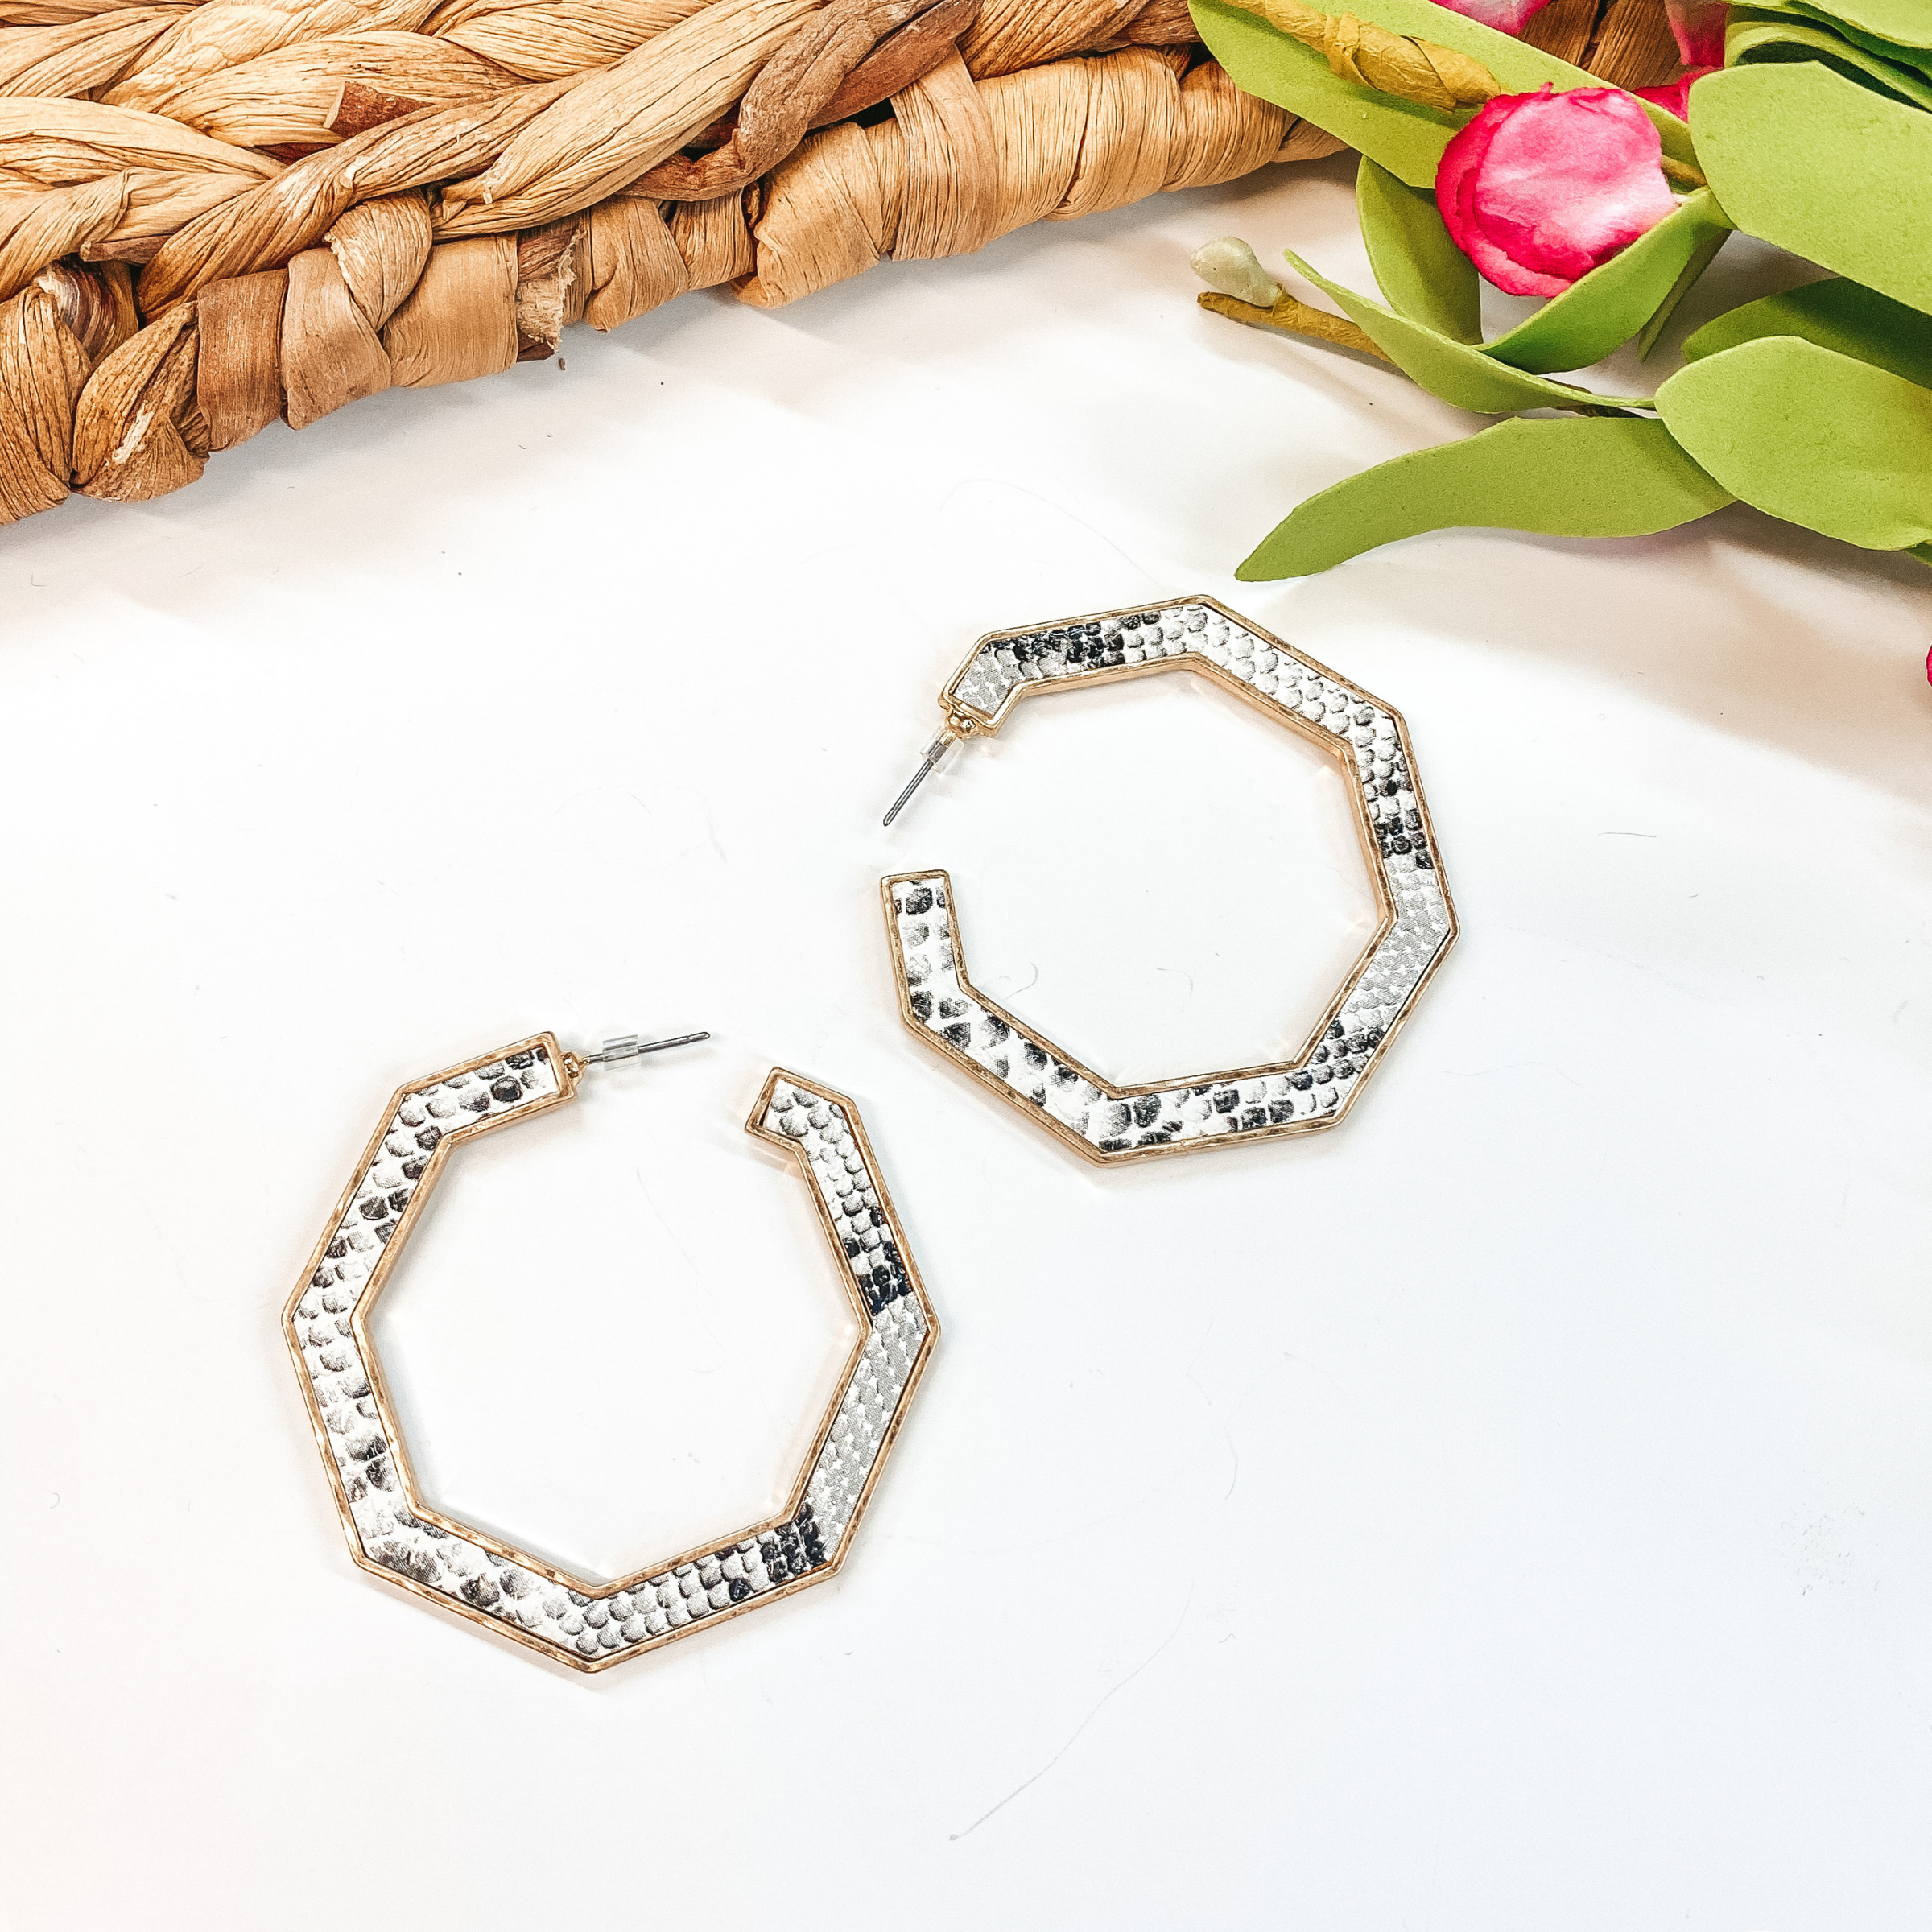 Octagon Hoop Earrings in White Snake Print - Giddy Up Glamour Boutique